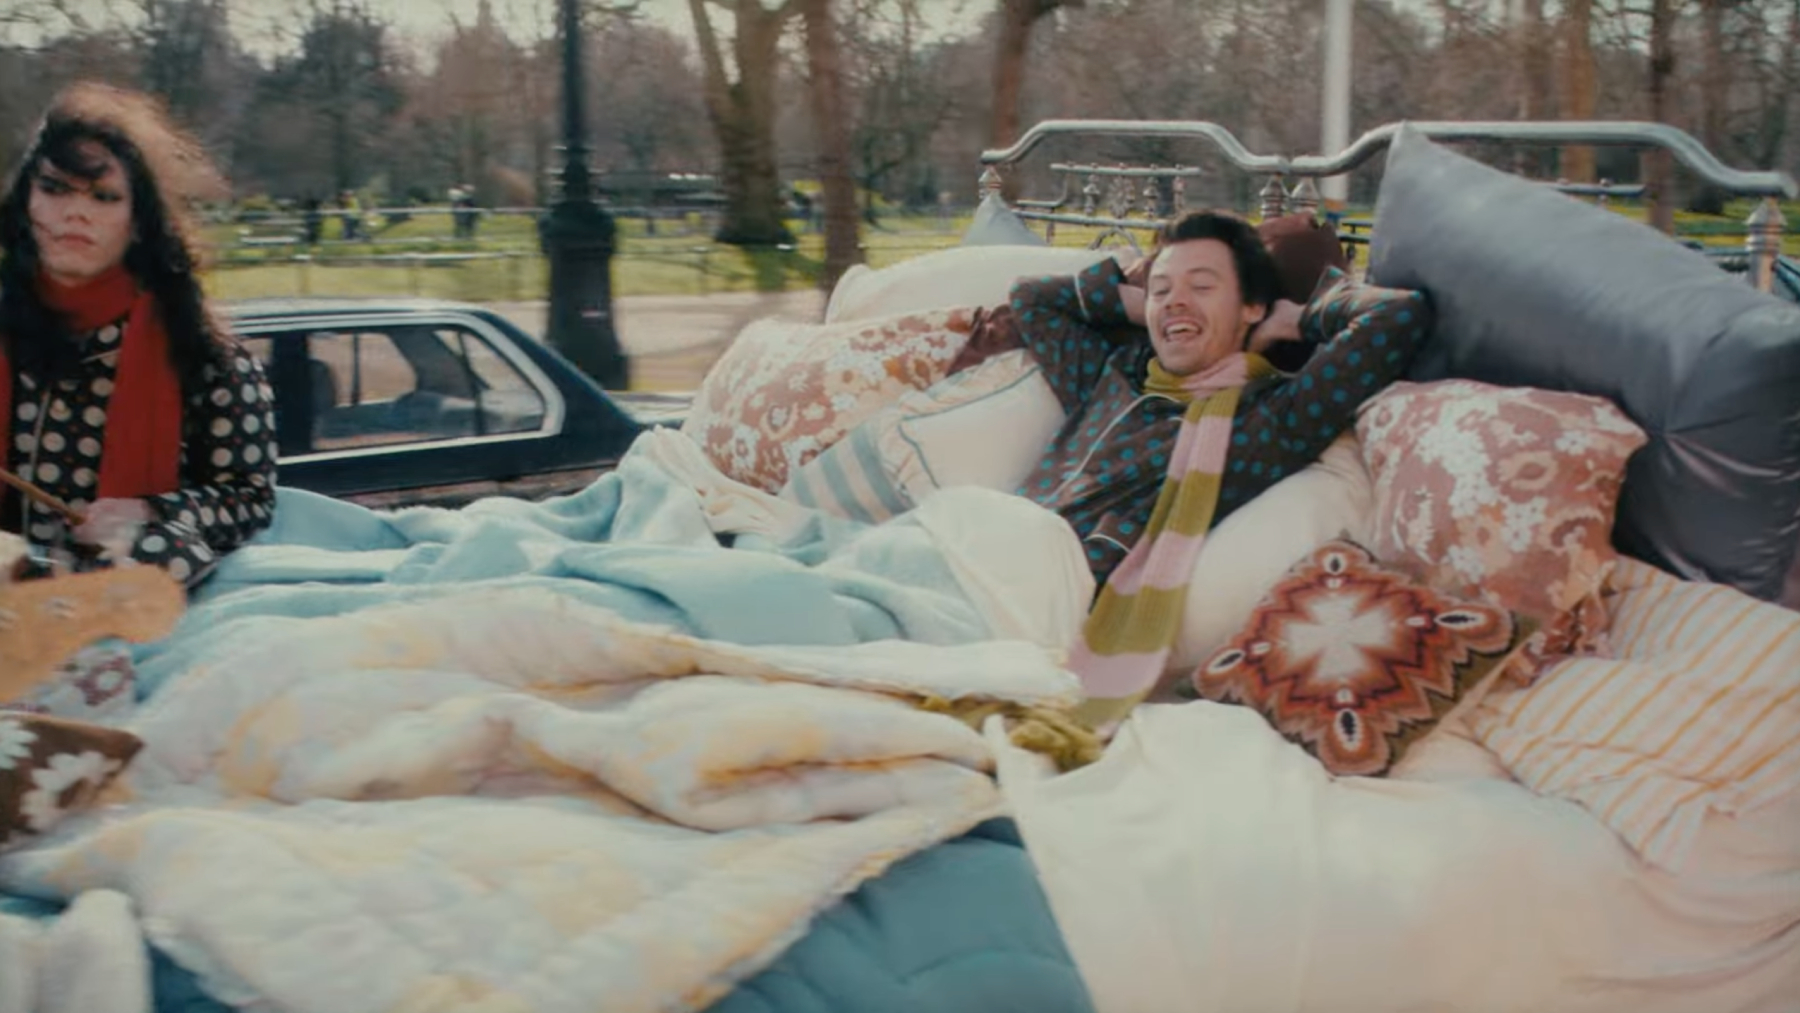 Harry Styles goes bed-hopping in a new ‘Late Night Talking’ music video